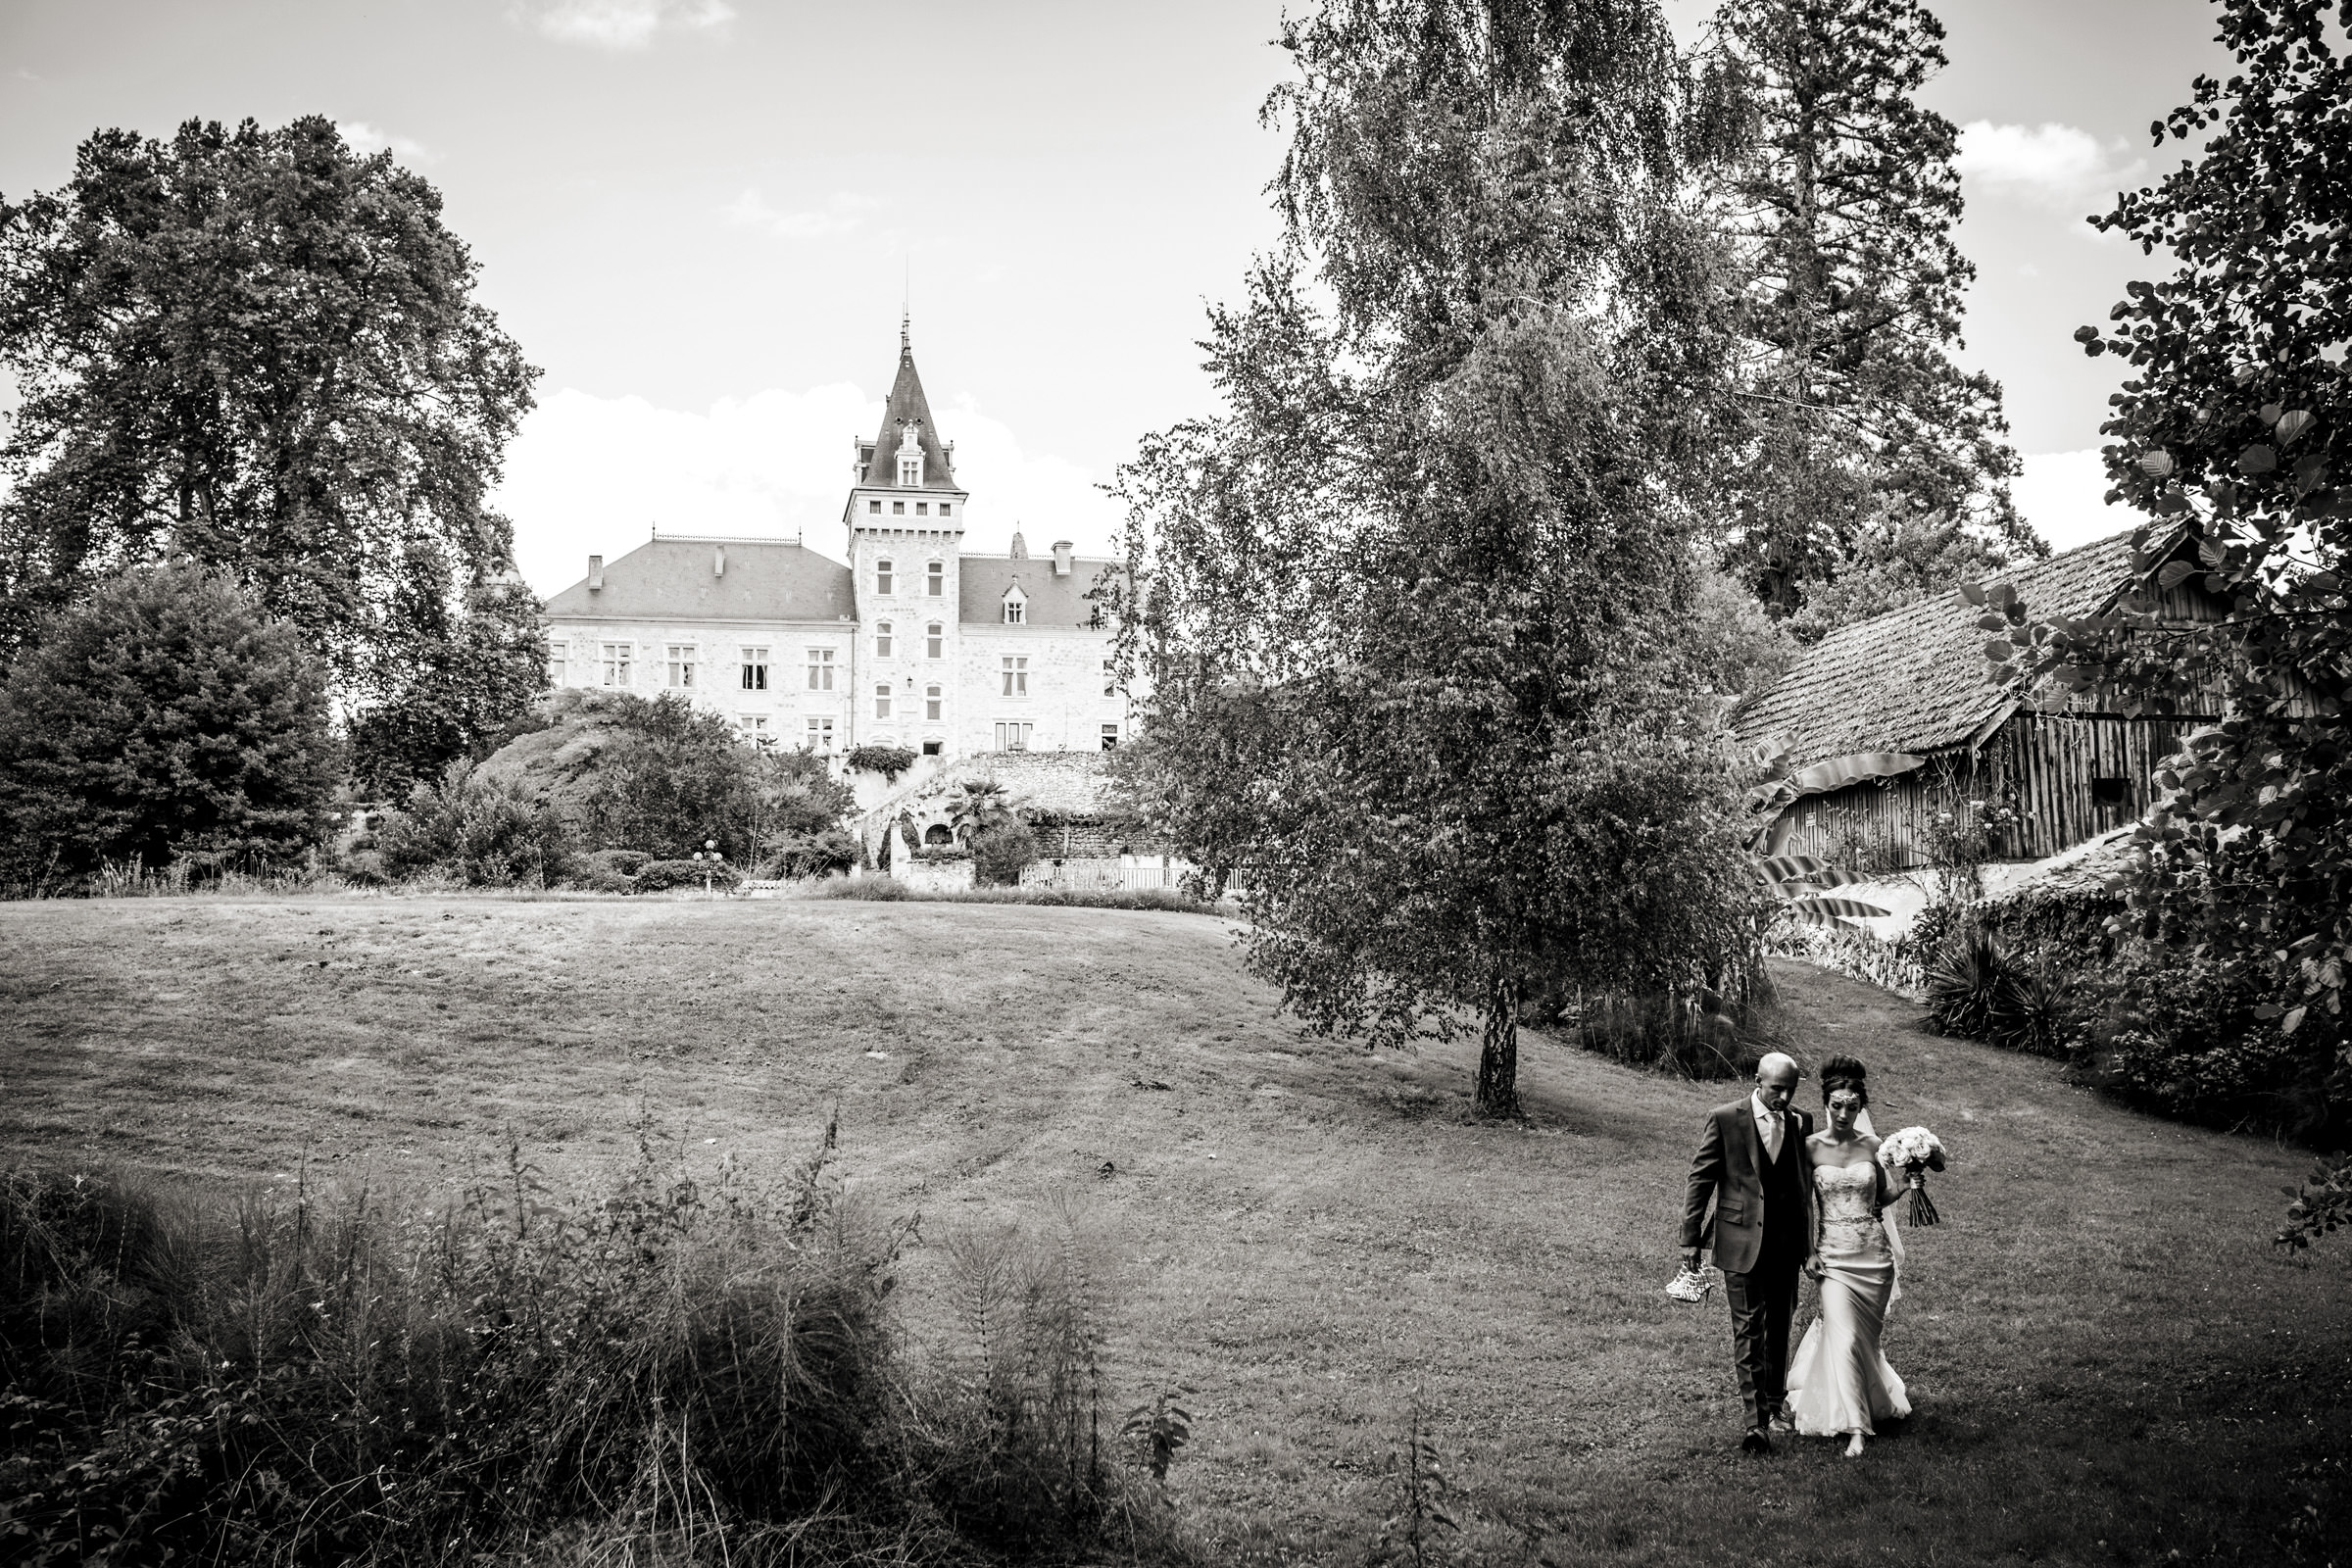 Uk Wedding photographers working at chateau de lisse in gascony 048.jpg